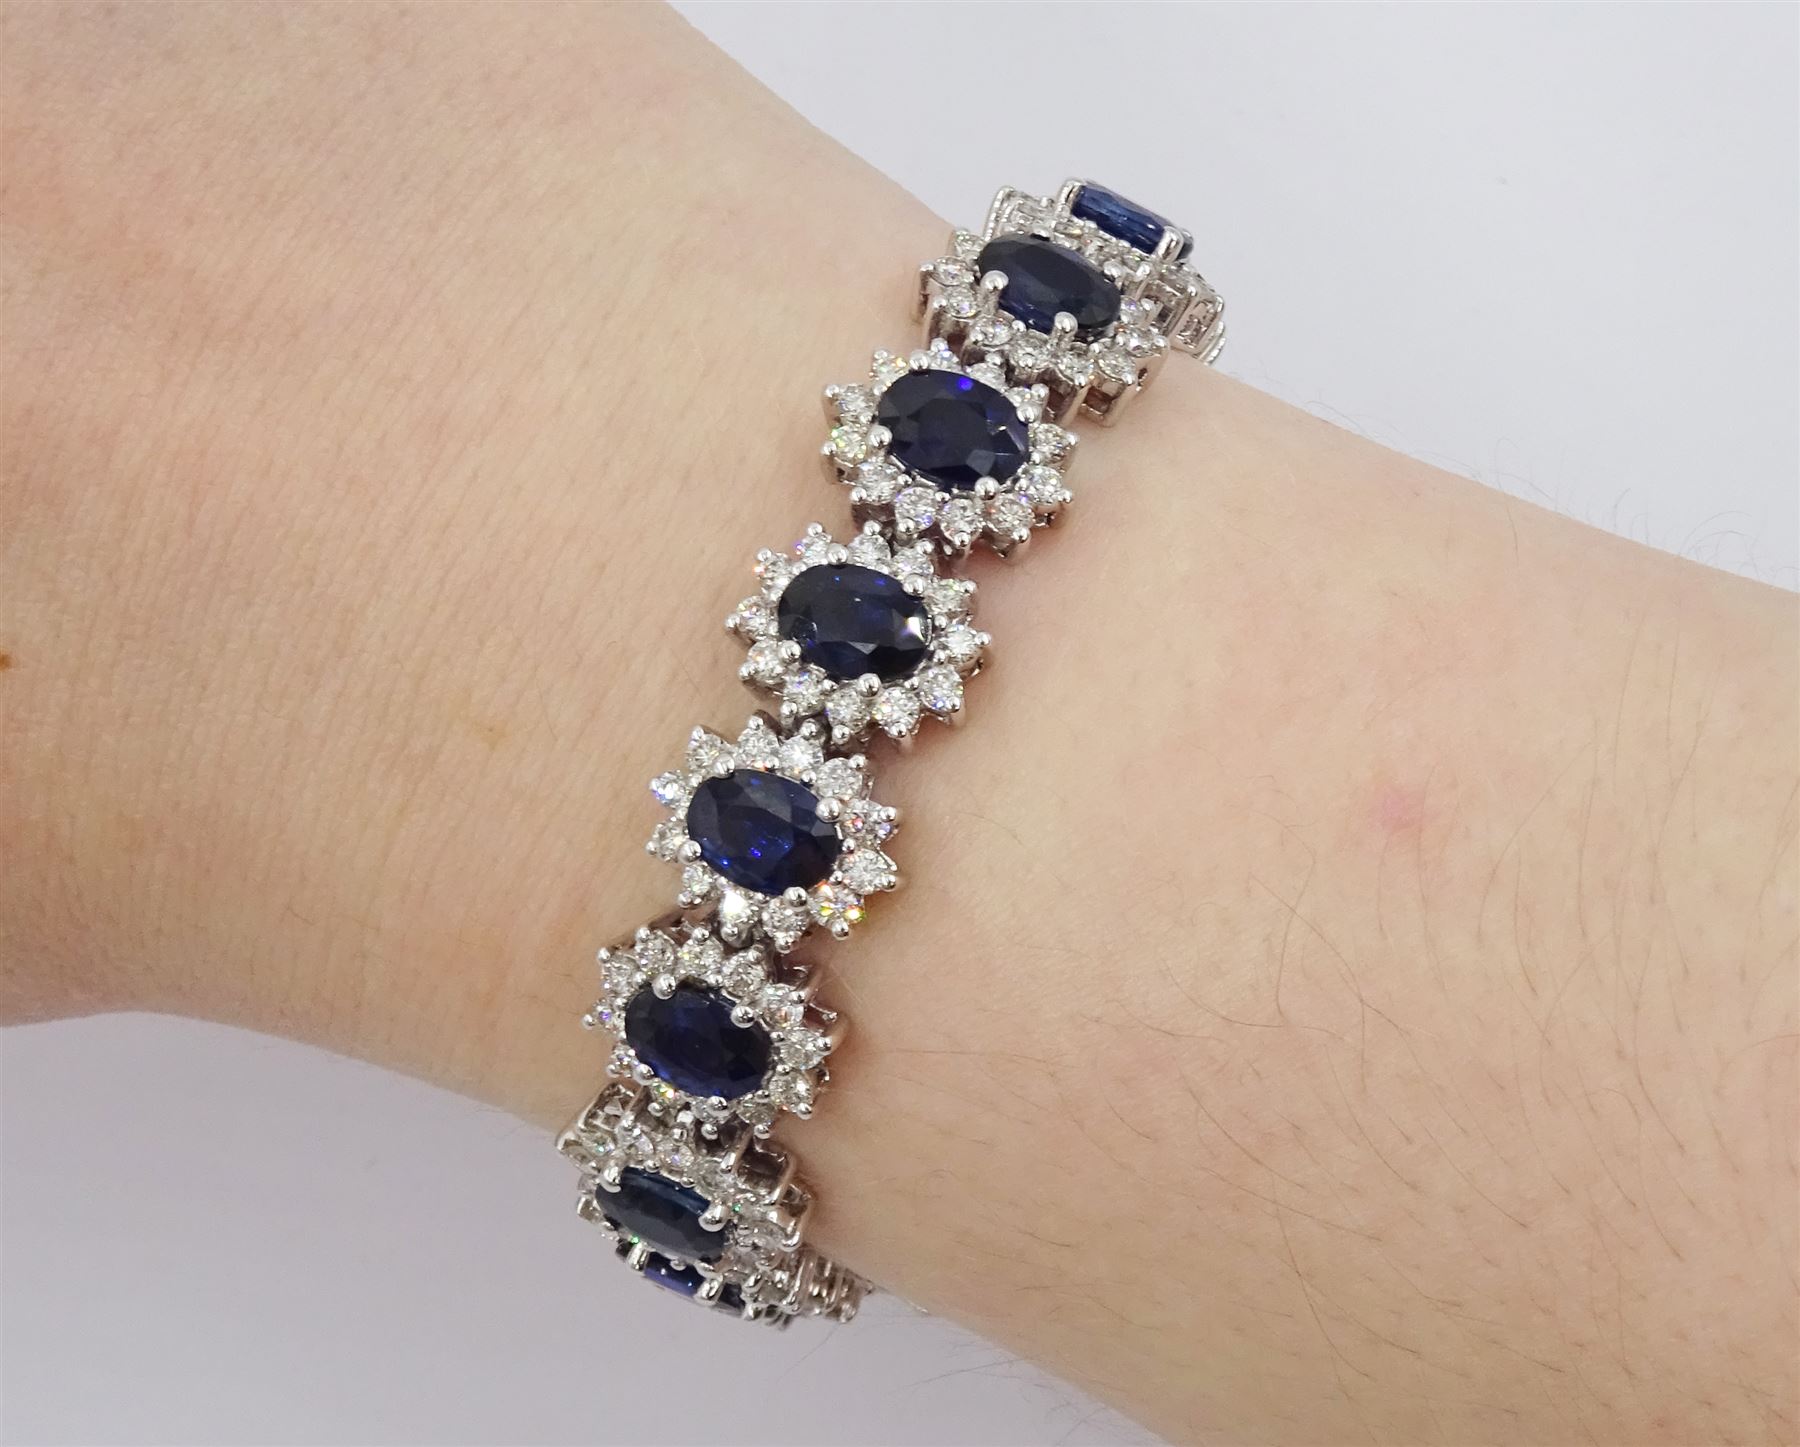 18ct white gold oval cut sapphire and round brilliant cut diamond bracelet - Image 2 of 3